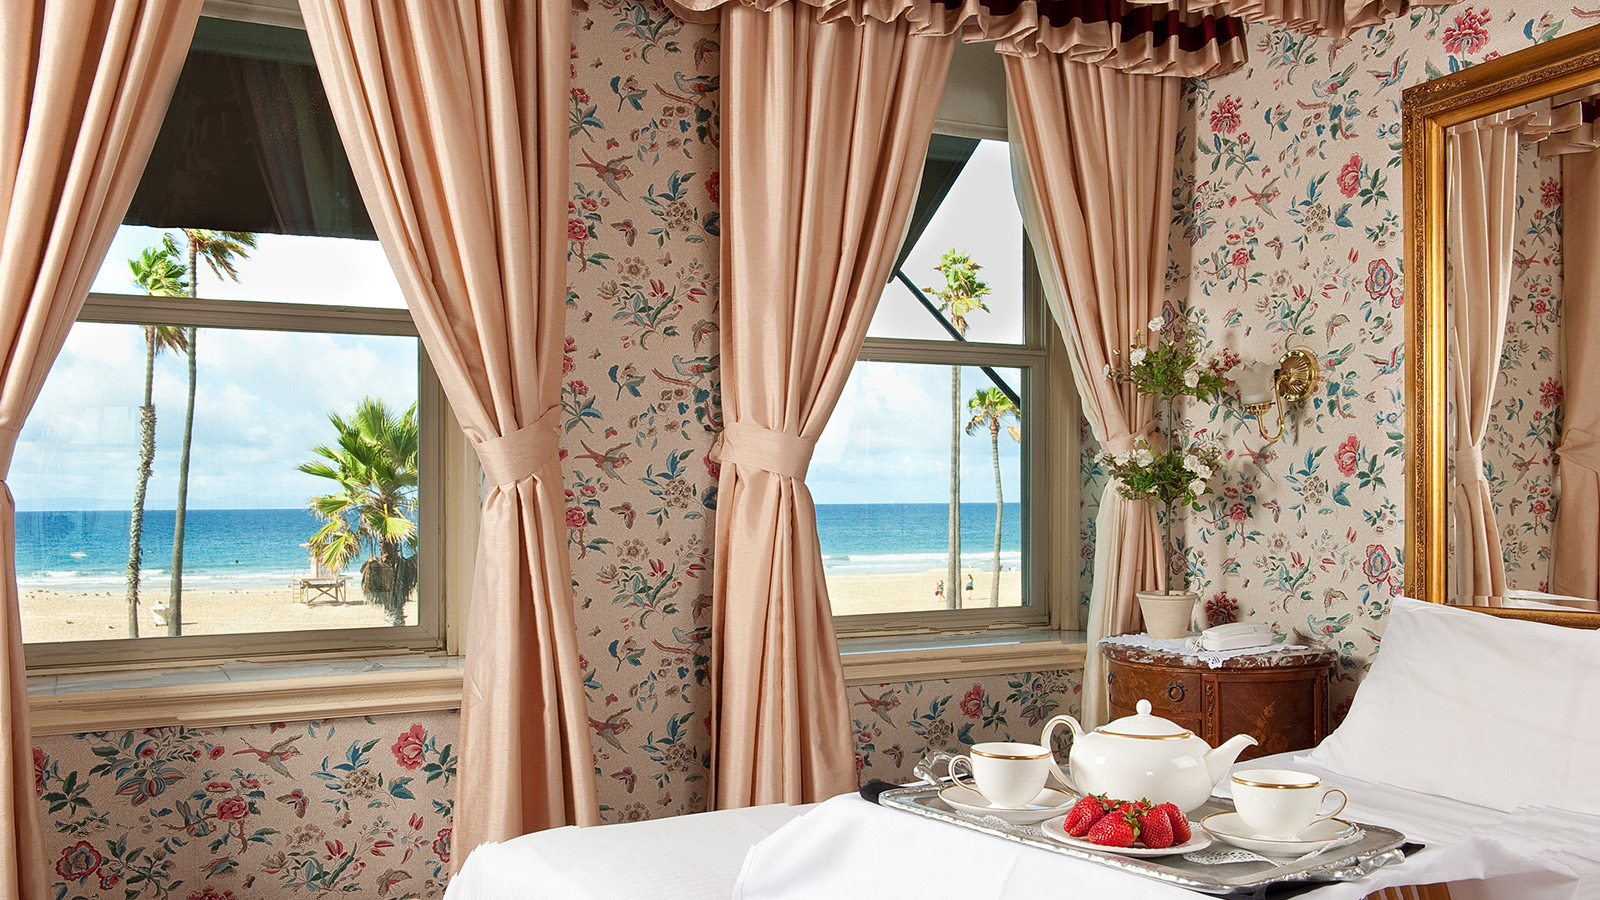 Room with Ocean view and breakfast Tray